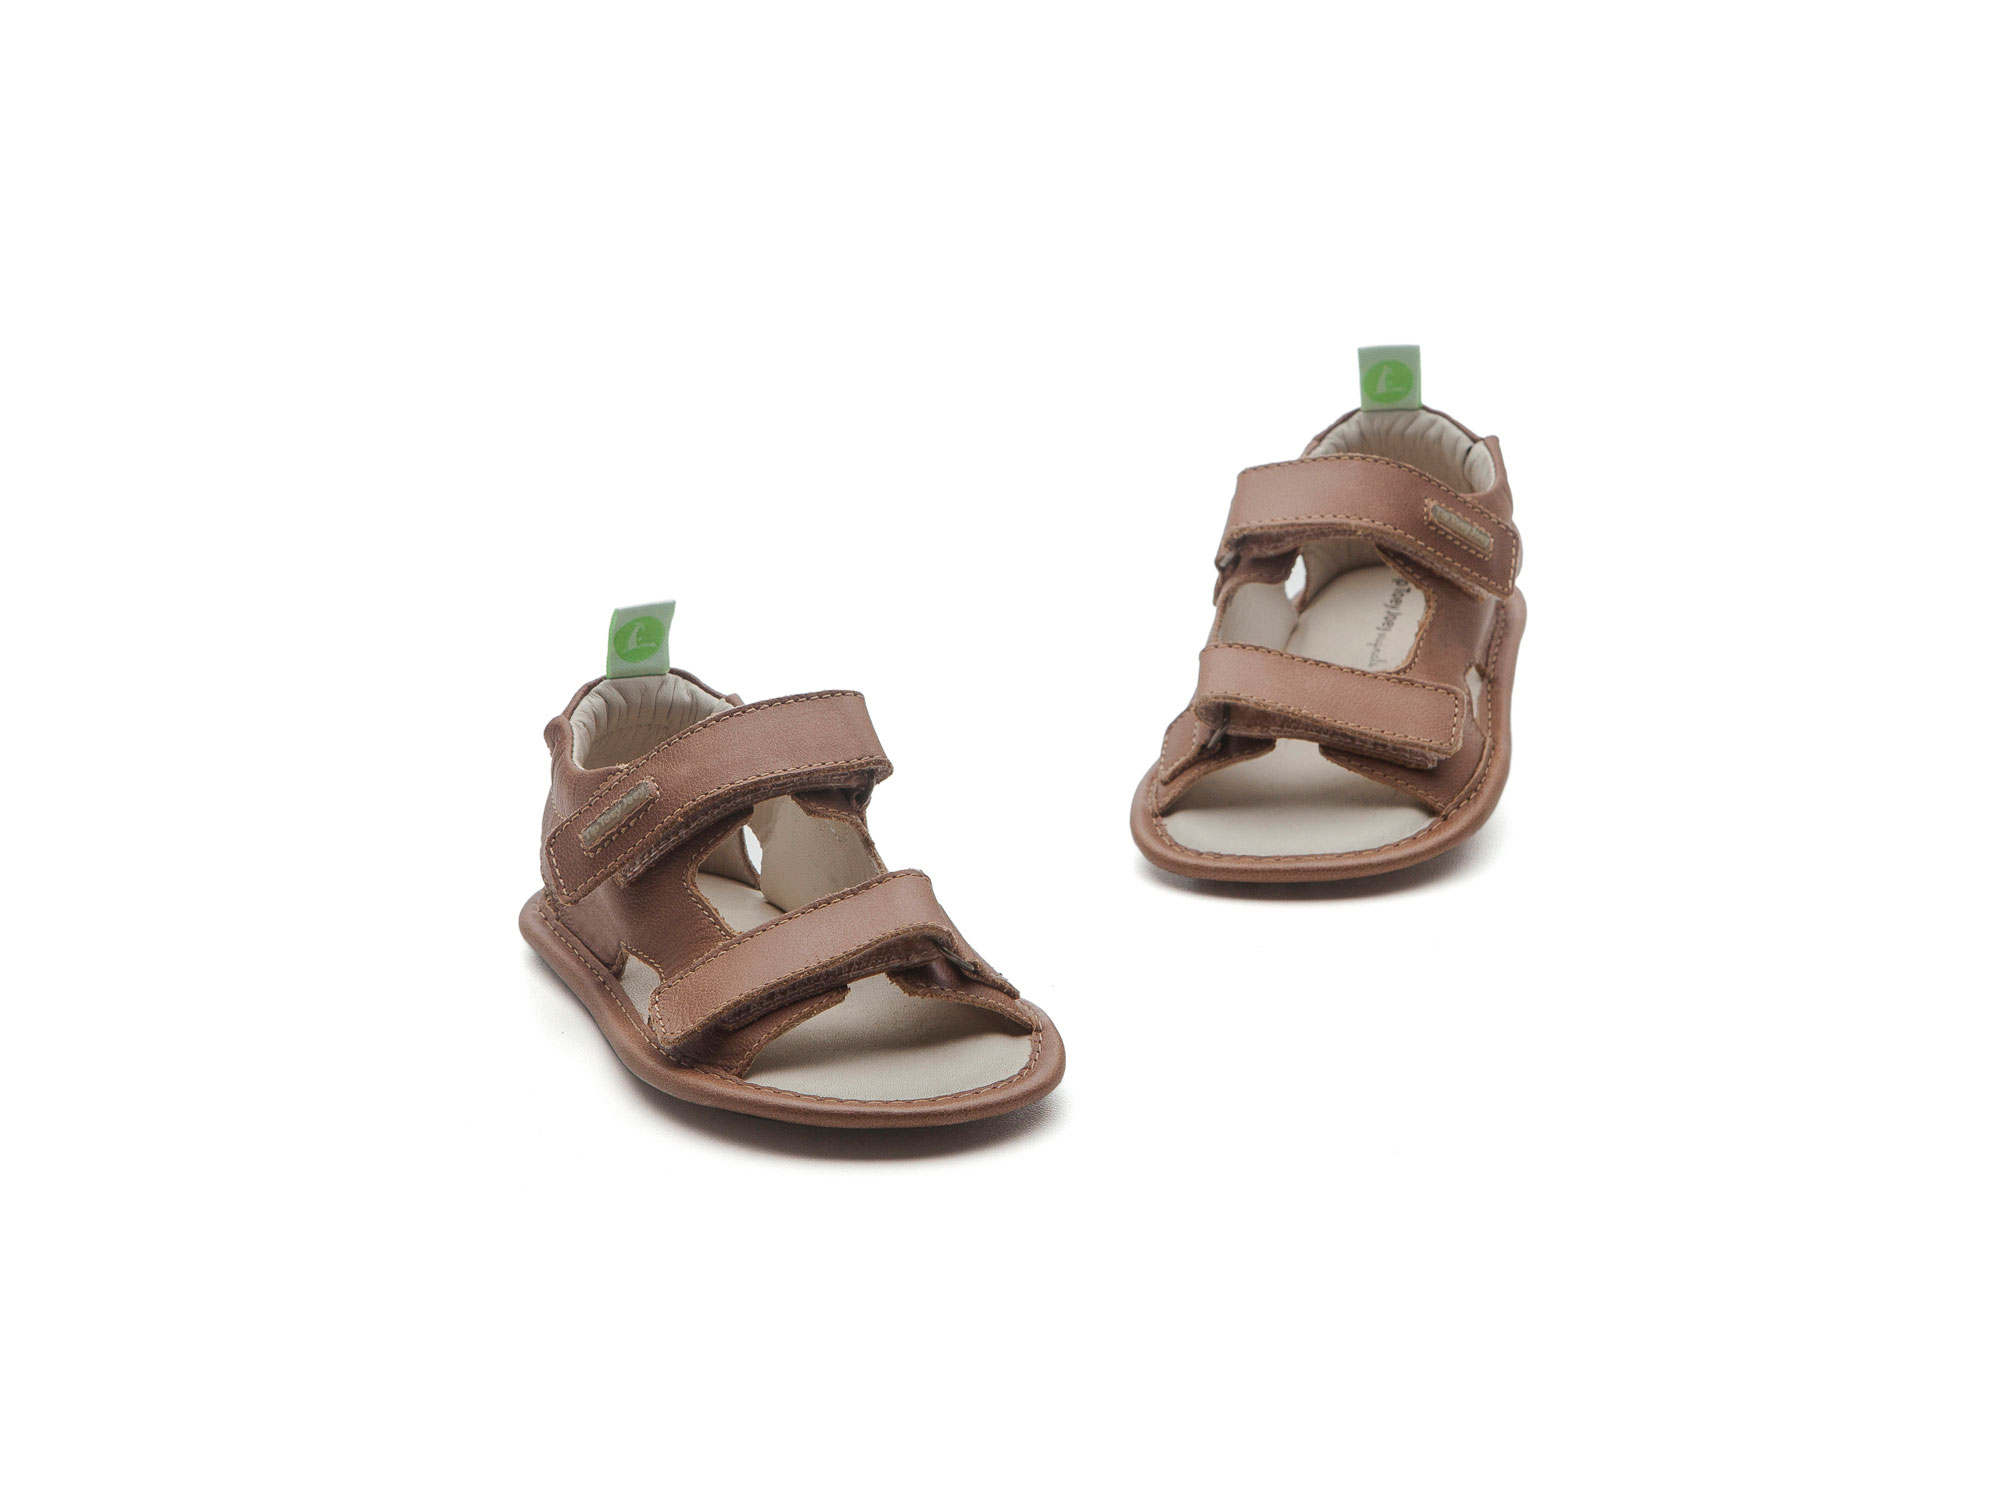 SIT & CRAWL Sandals for Boys Dongy | Tip Toey Joey - Australia - 1